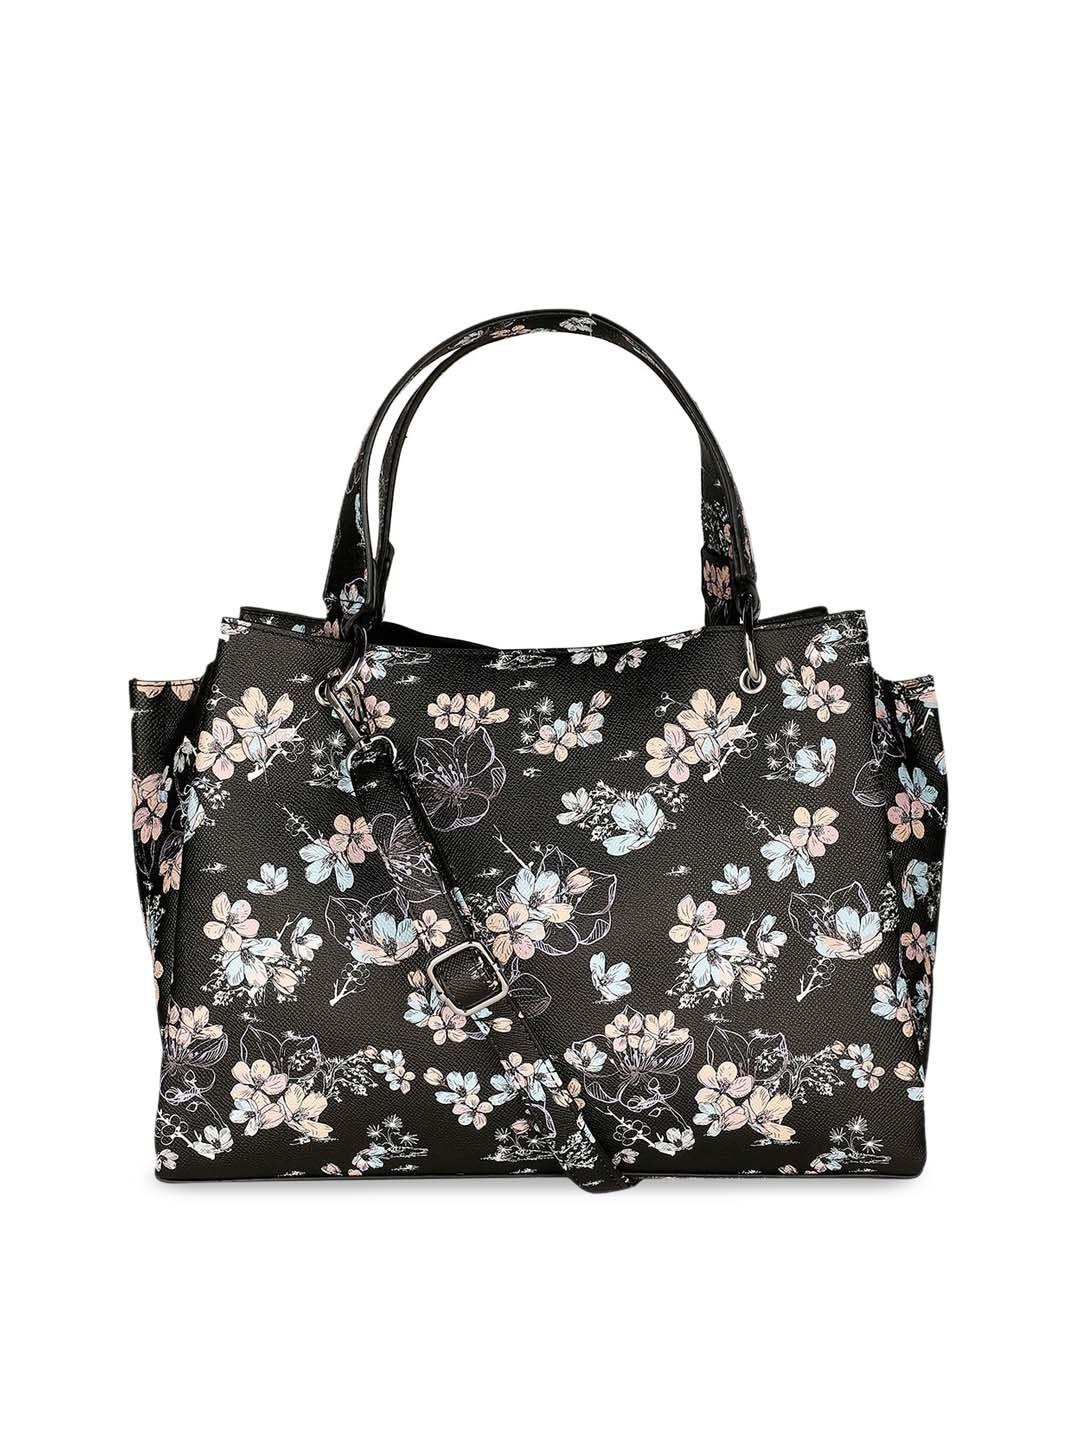 marie claire black printed leather structured satchel bag